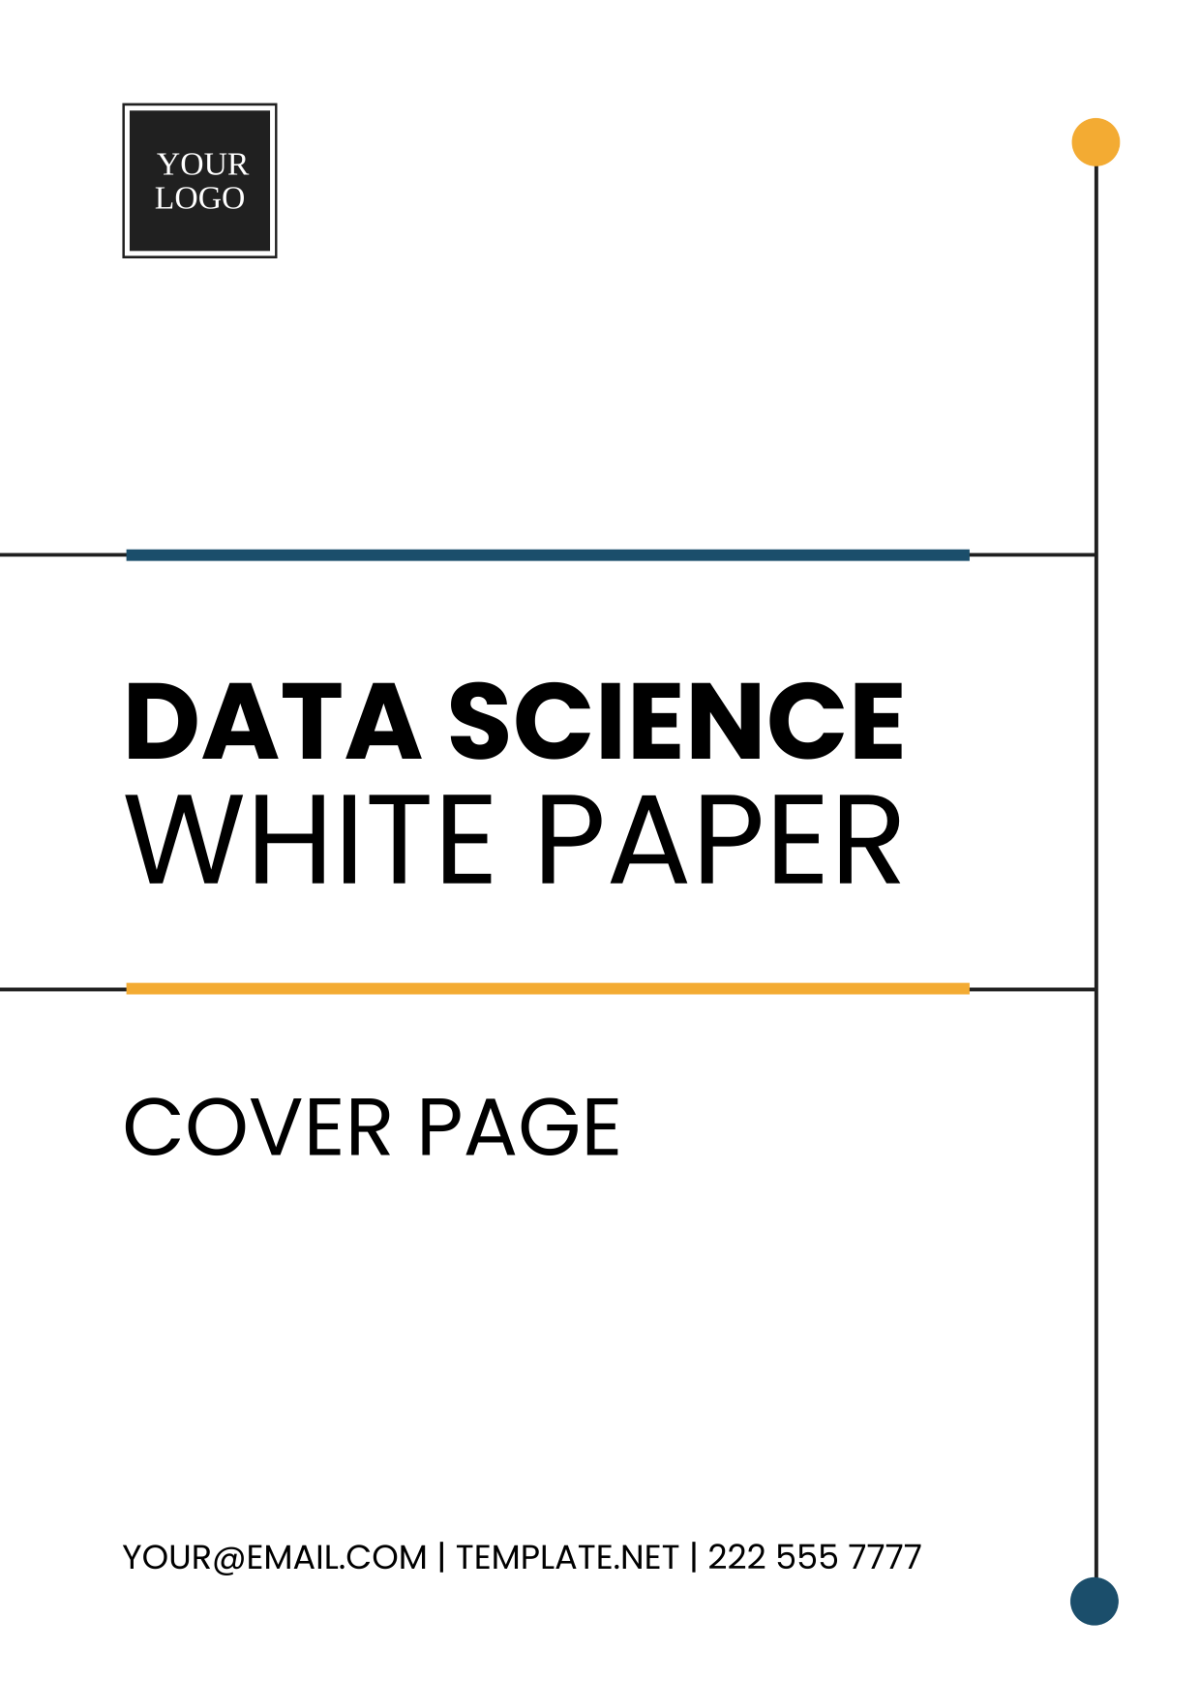 Data Science White Paper Cover Page